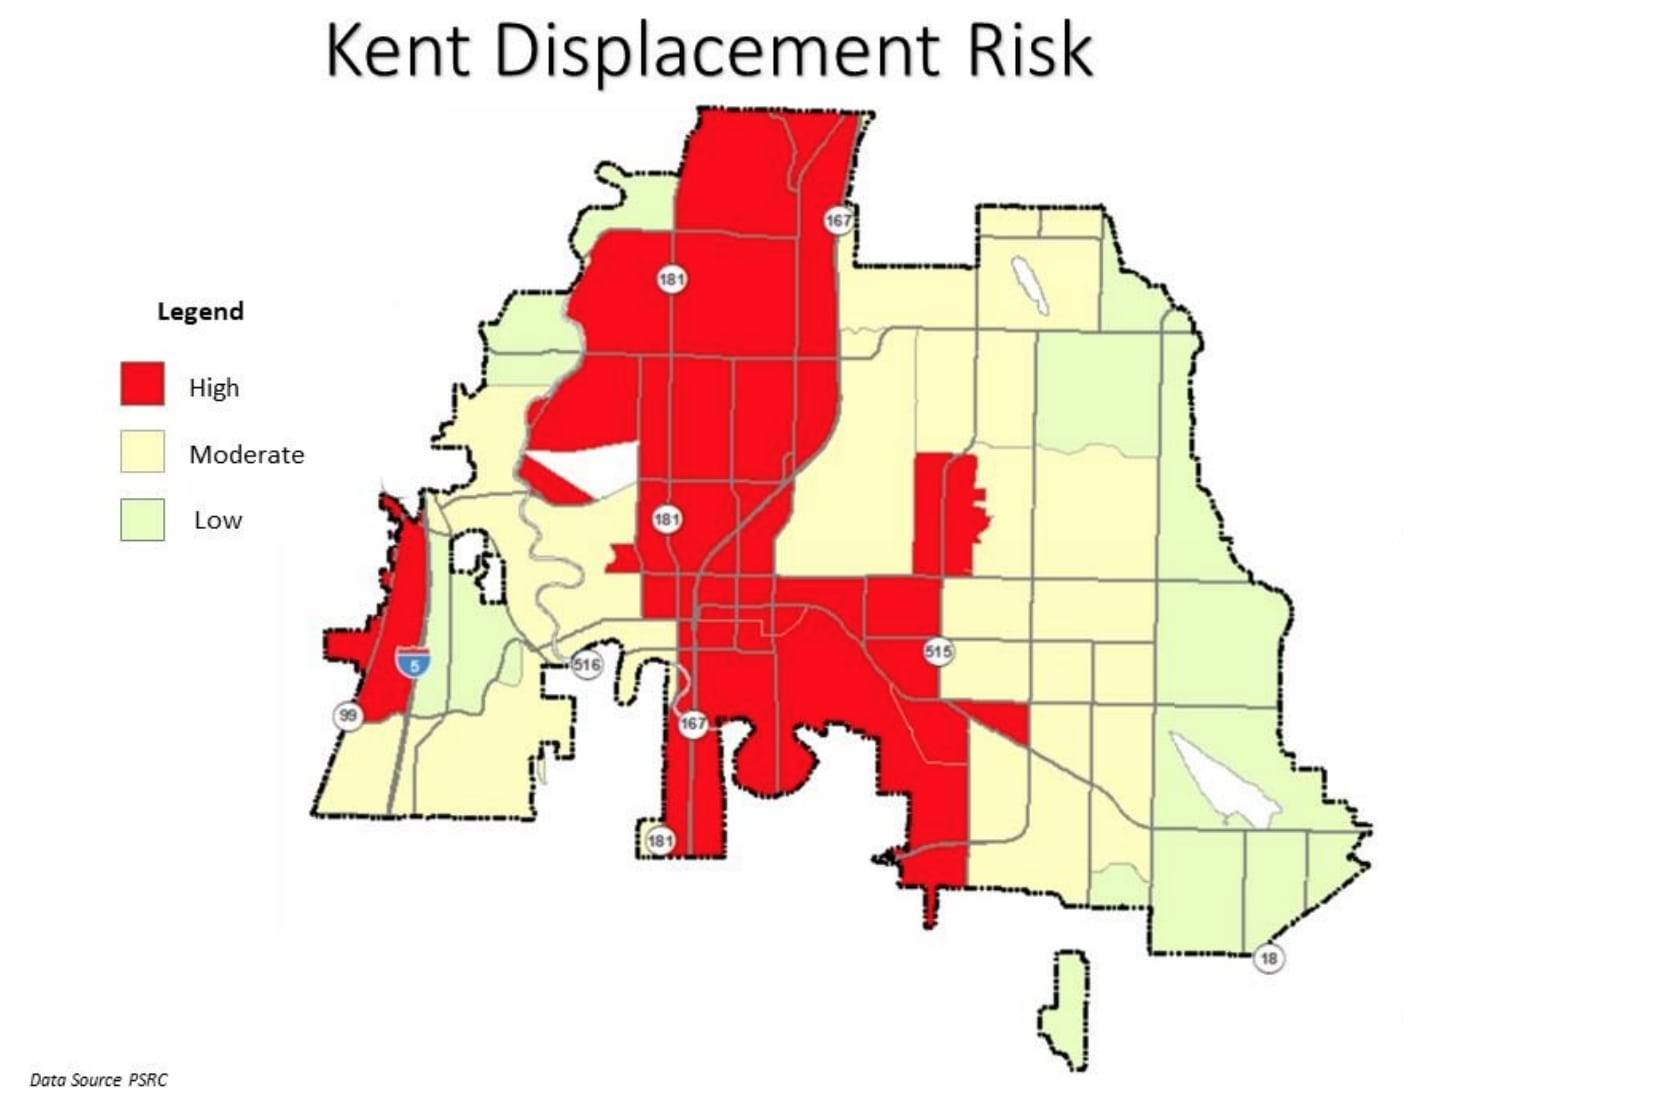 A map indicating estimated high housing displacement risk neighborhoods in Kent. (Courtesy of the City of Kent)